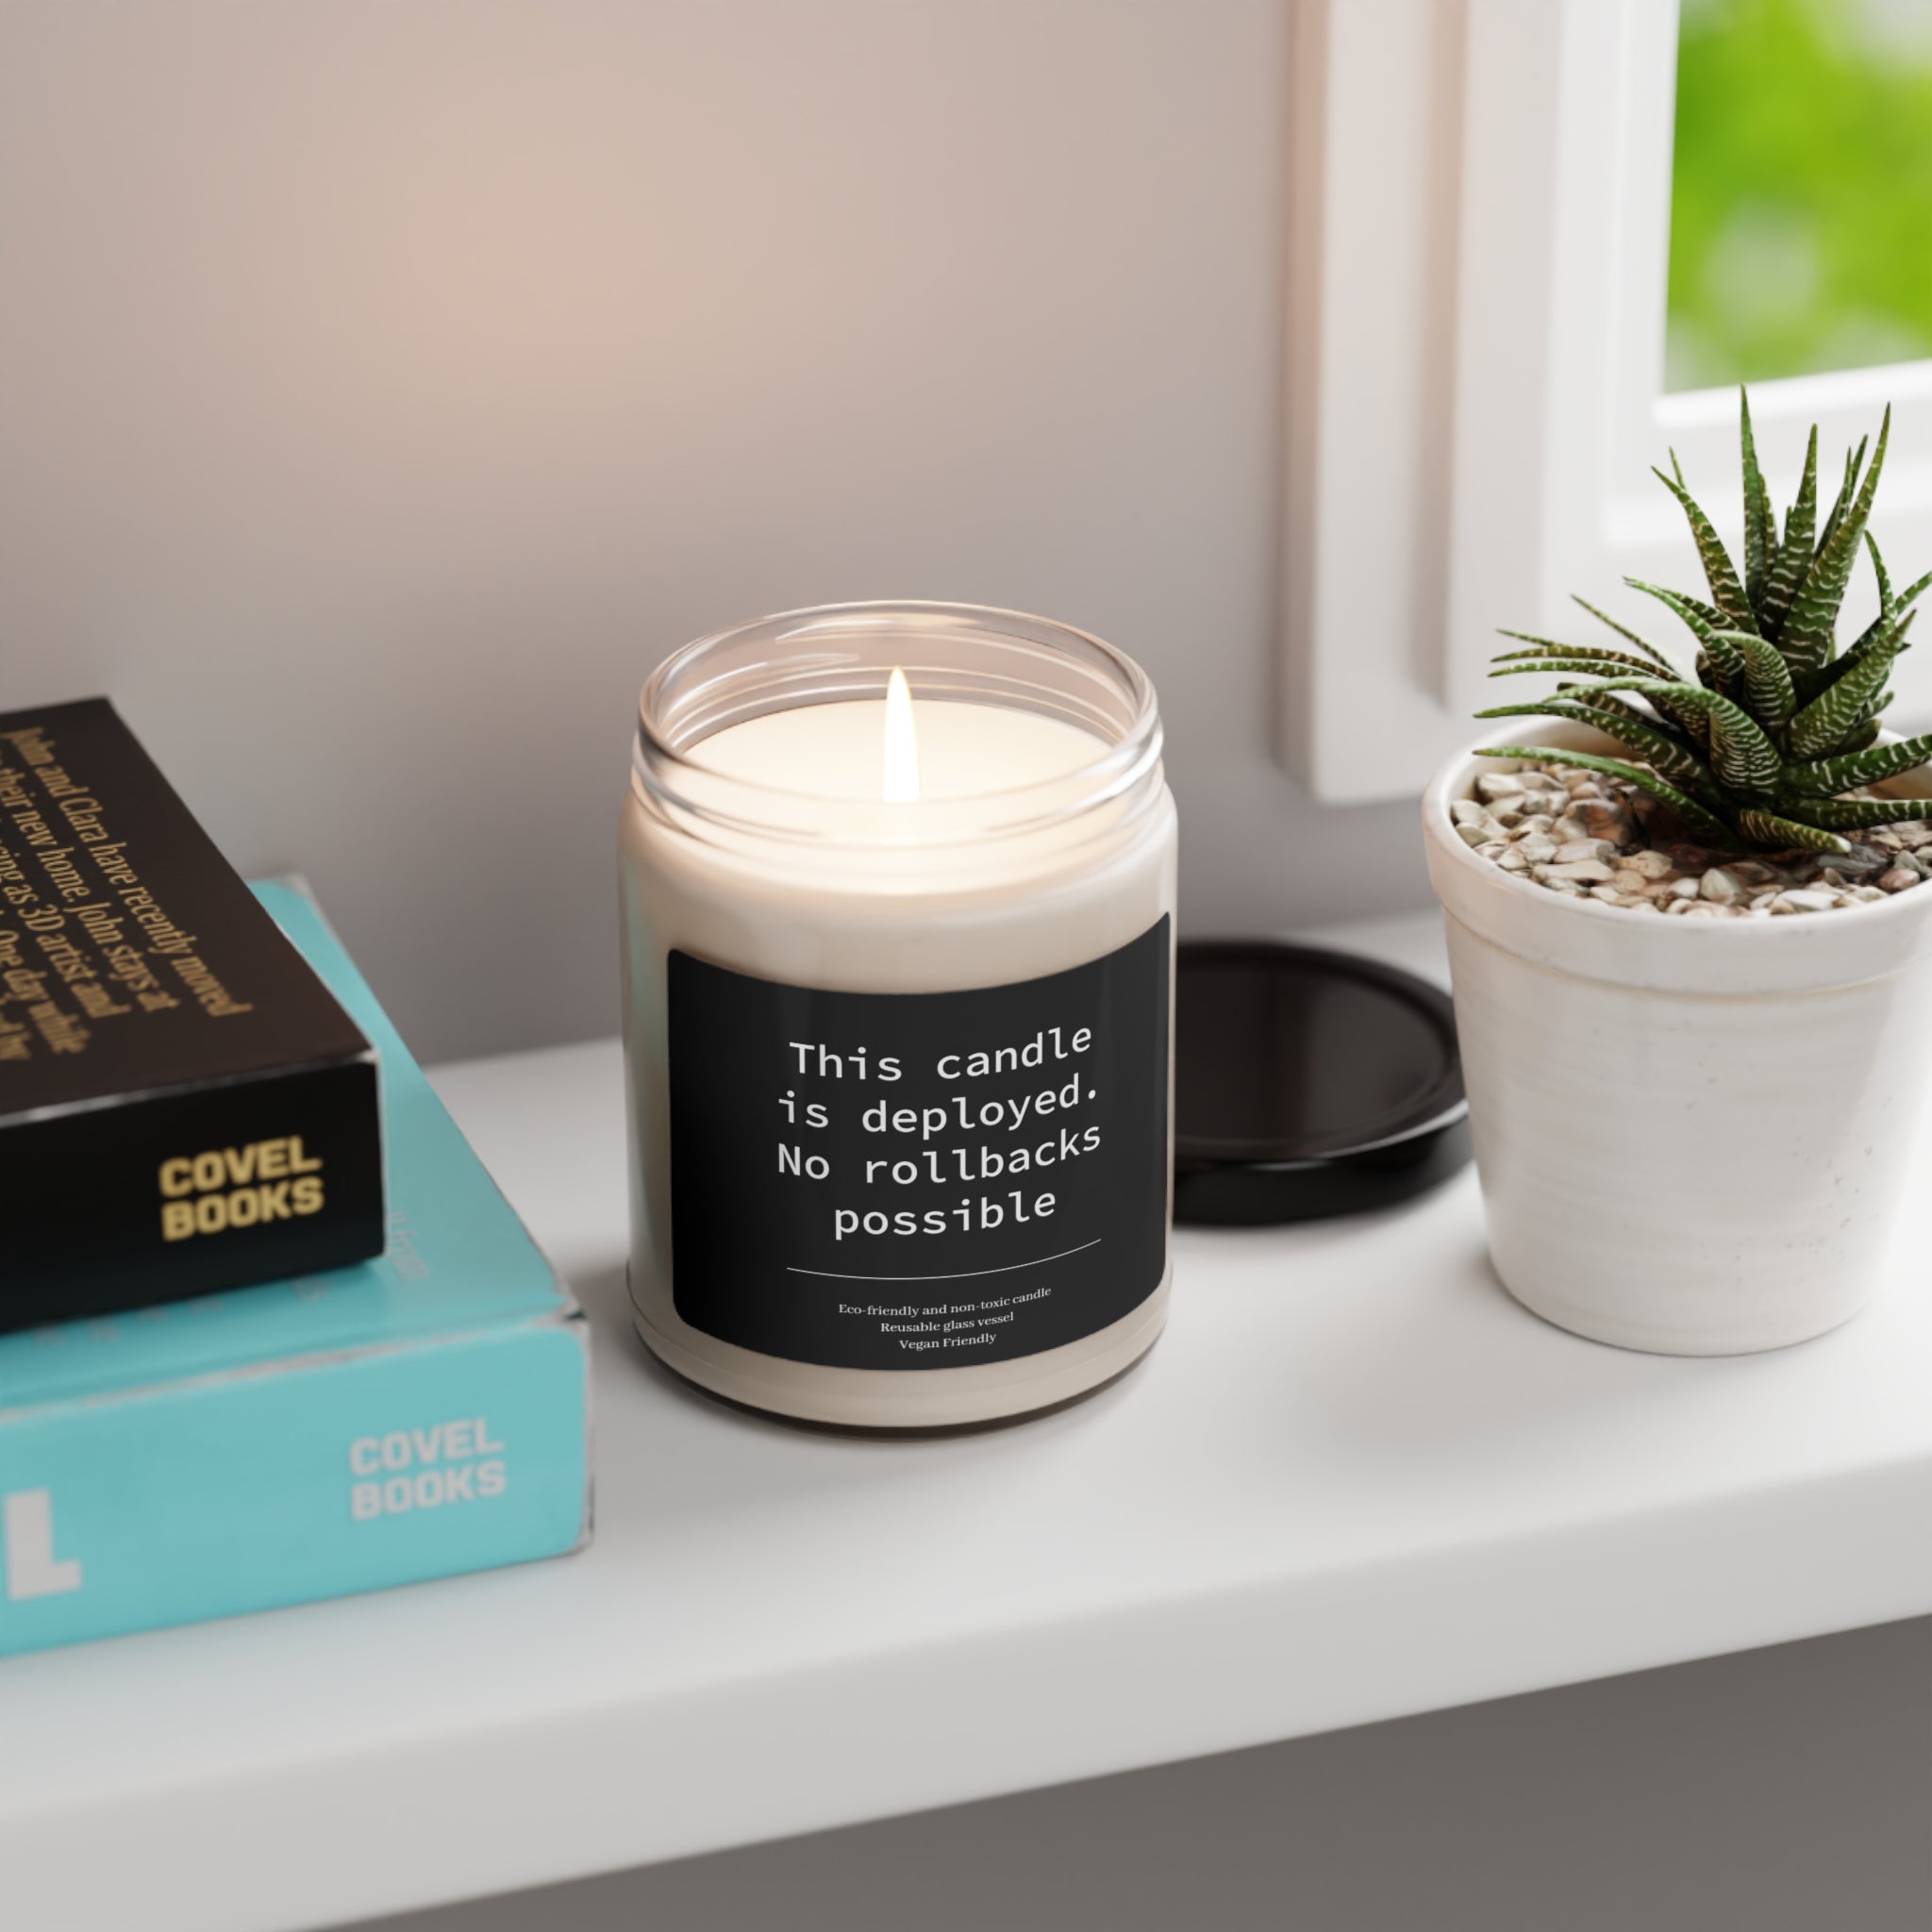 A This Candle Deployed - No Rollbacks- scented candle with humorous text on the label is placed on a windowsill next to a small potted plant and a stack of books.